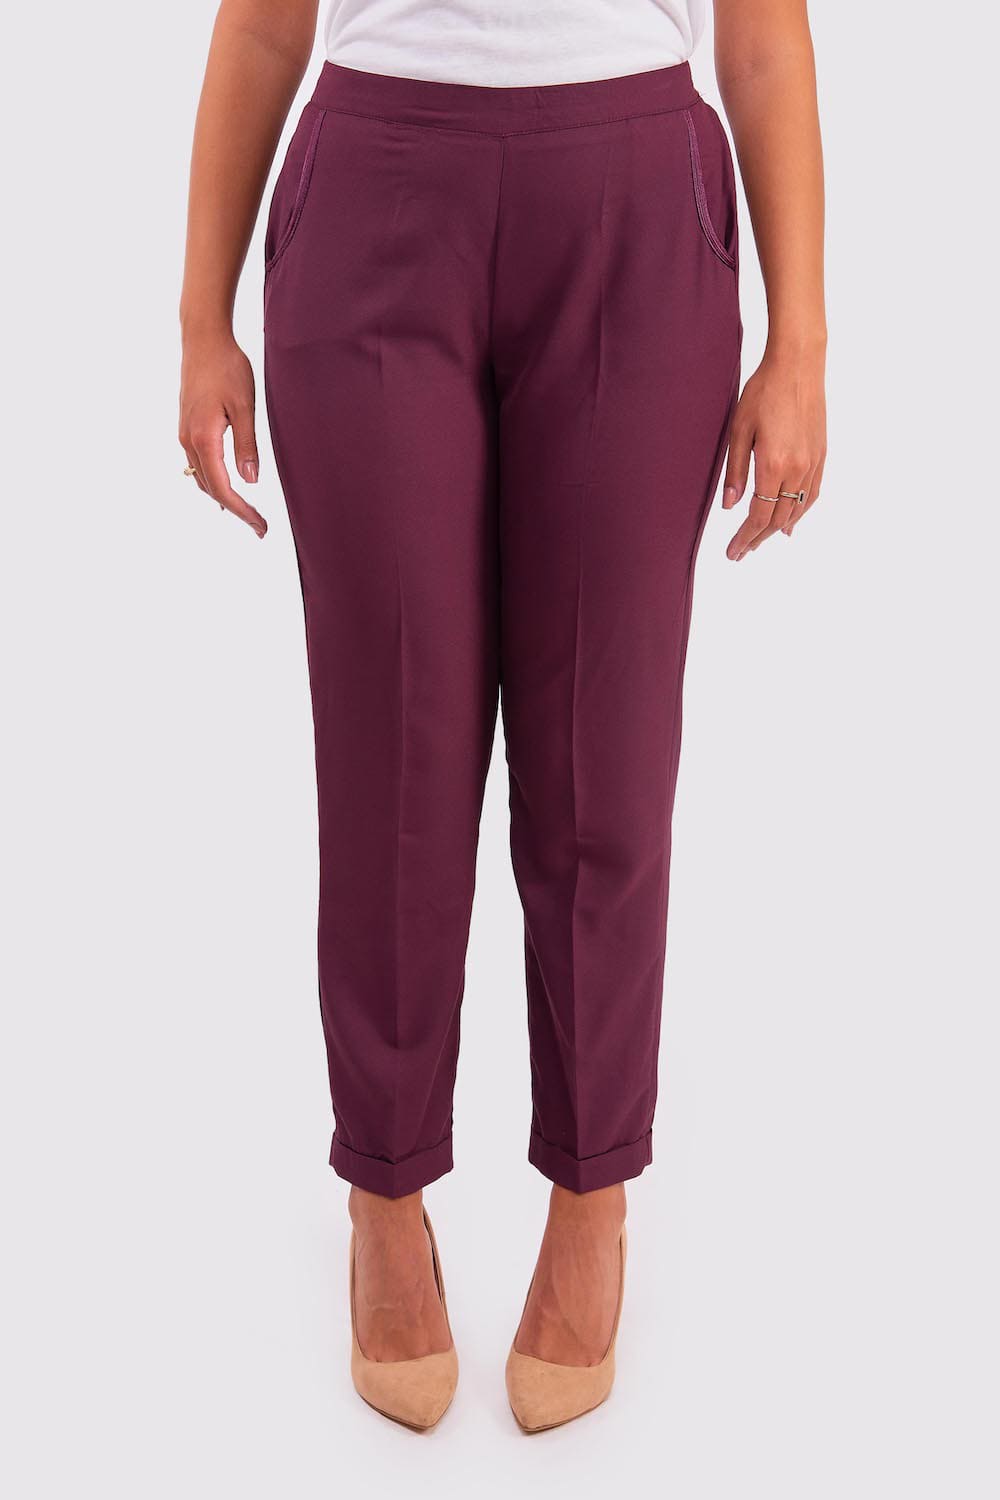 Sabah Women's High Waist Tailored Trousers in Prune